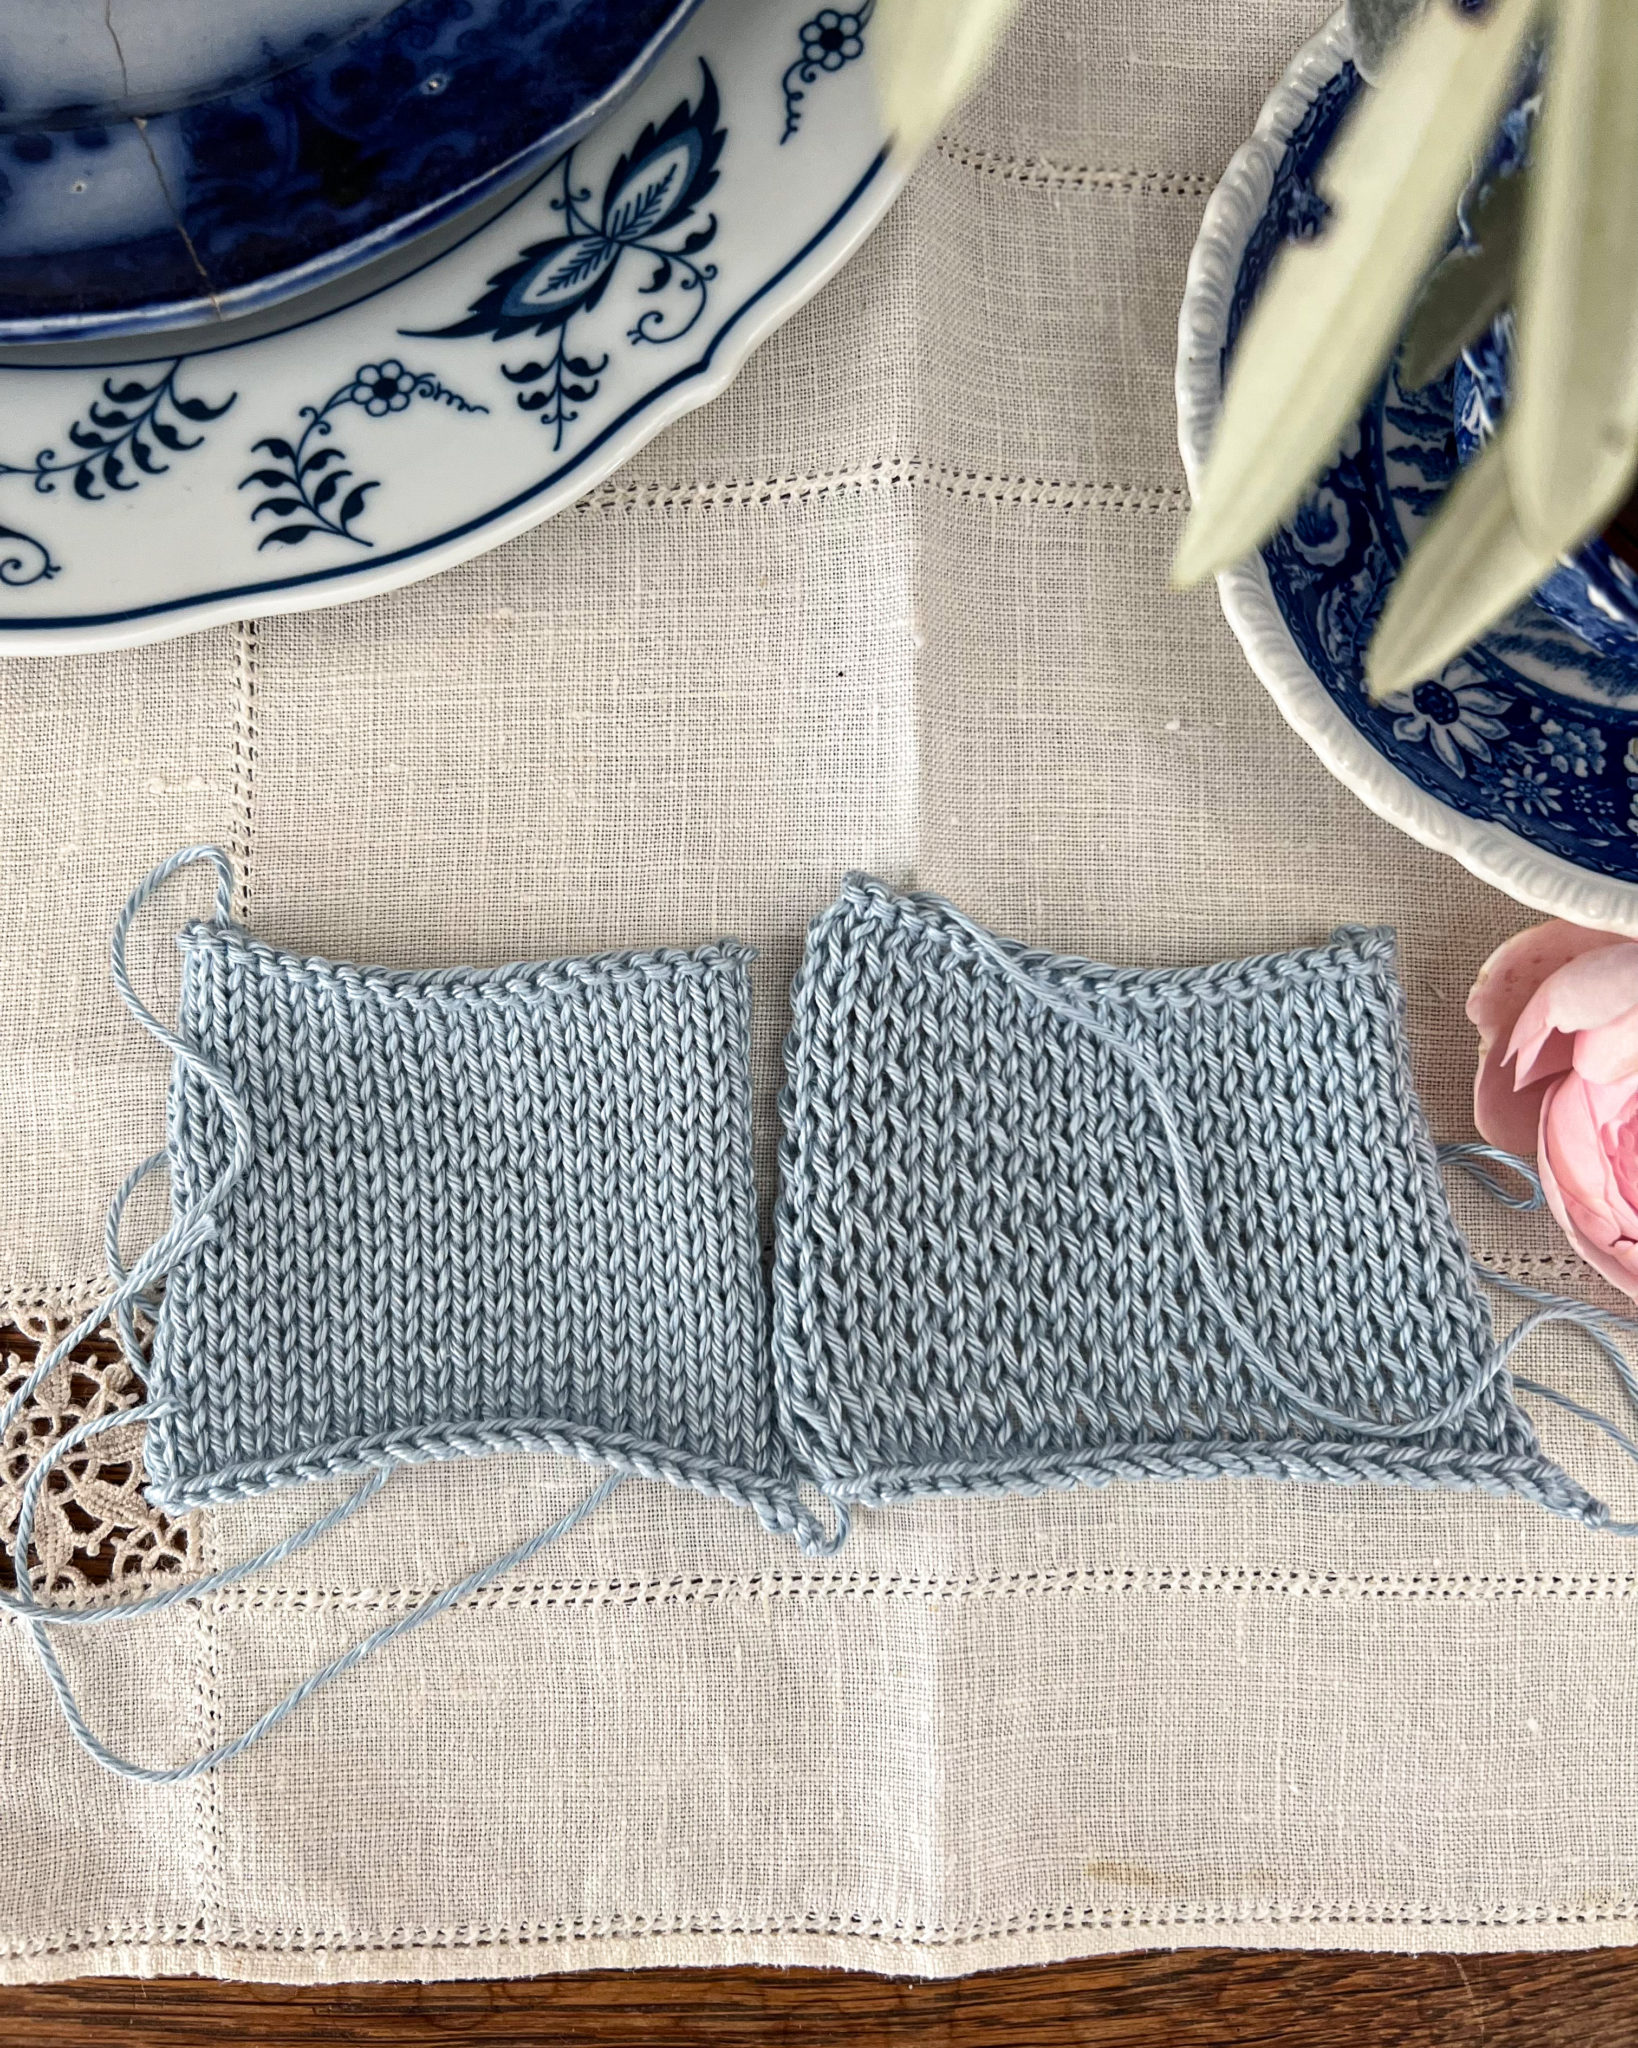 Two blue and white swatches are viewed top down with the smooth stockinette side facing up. The swatch on the left has even stitches. The swatch on the right has visible rowing out.